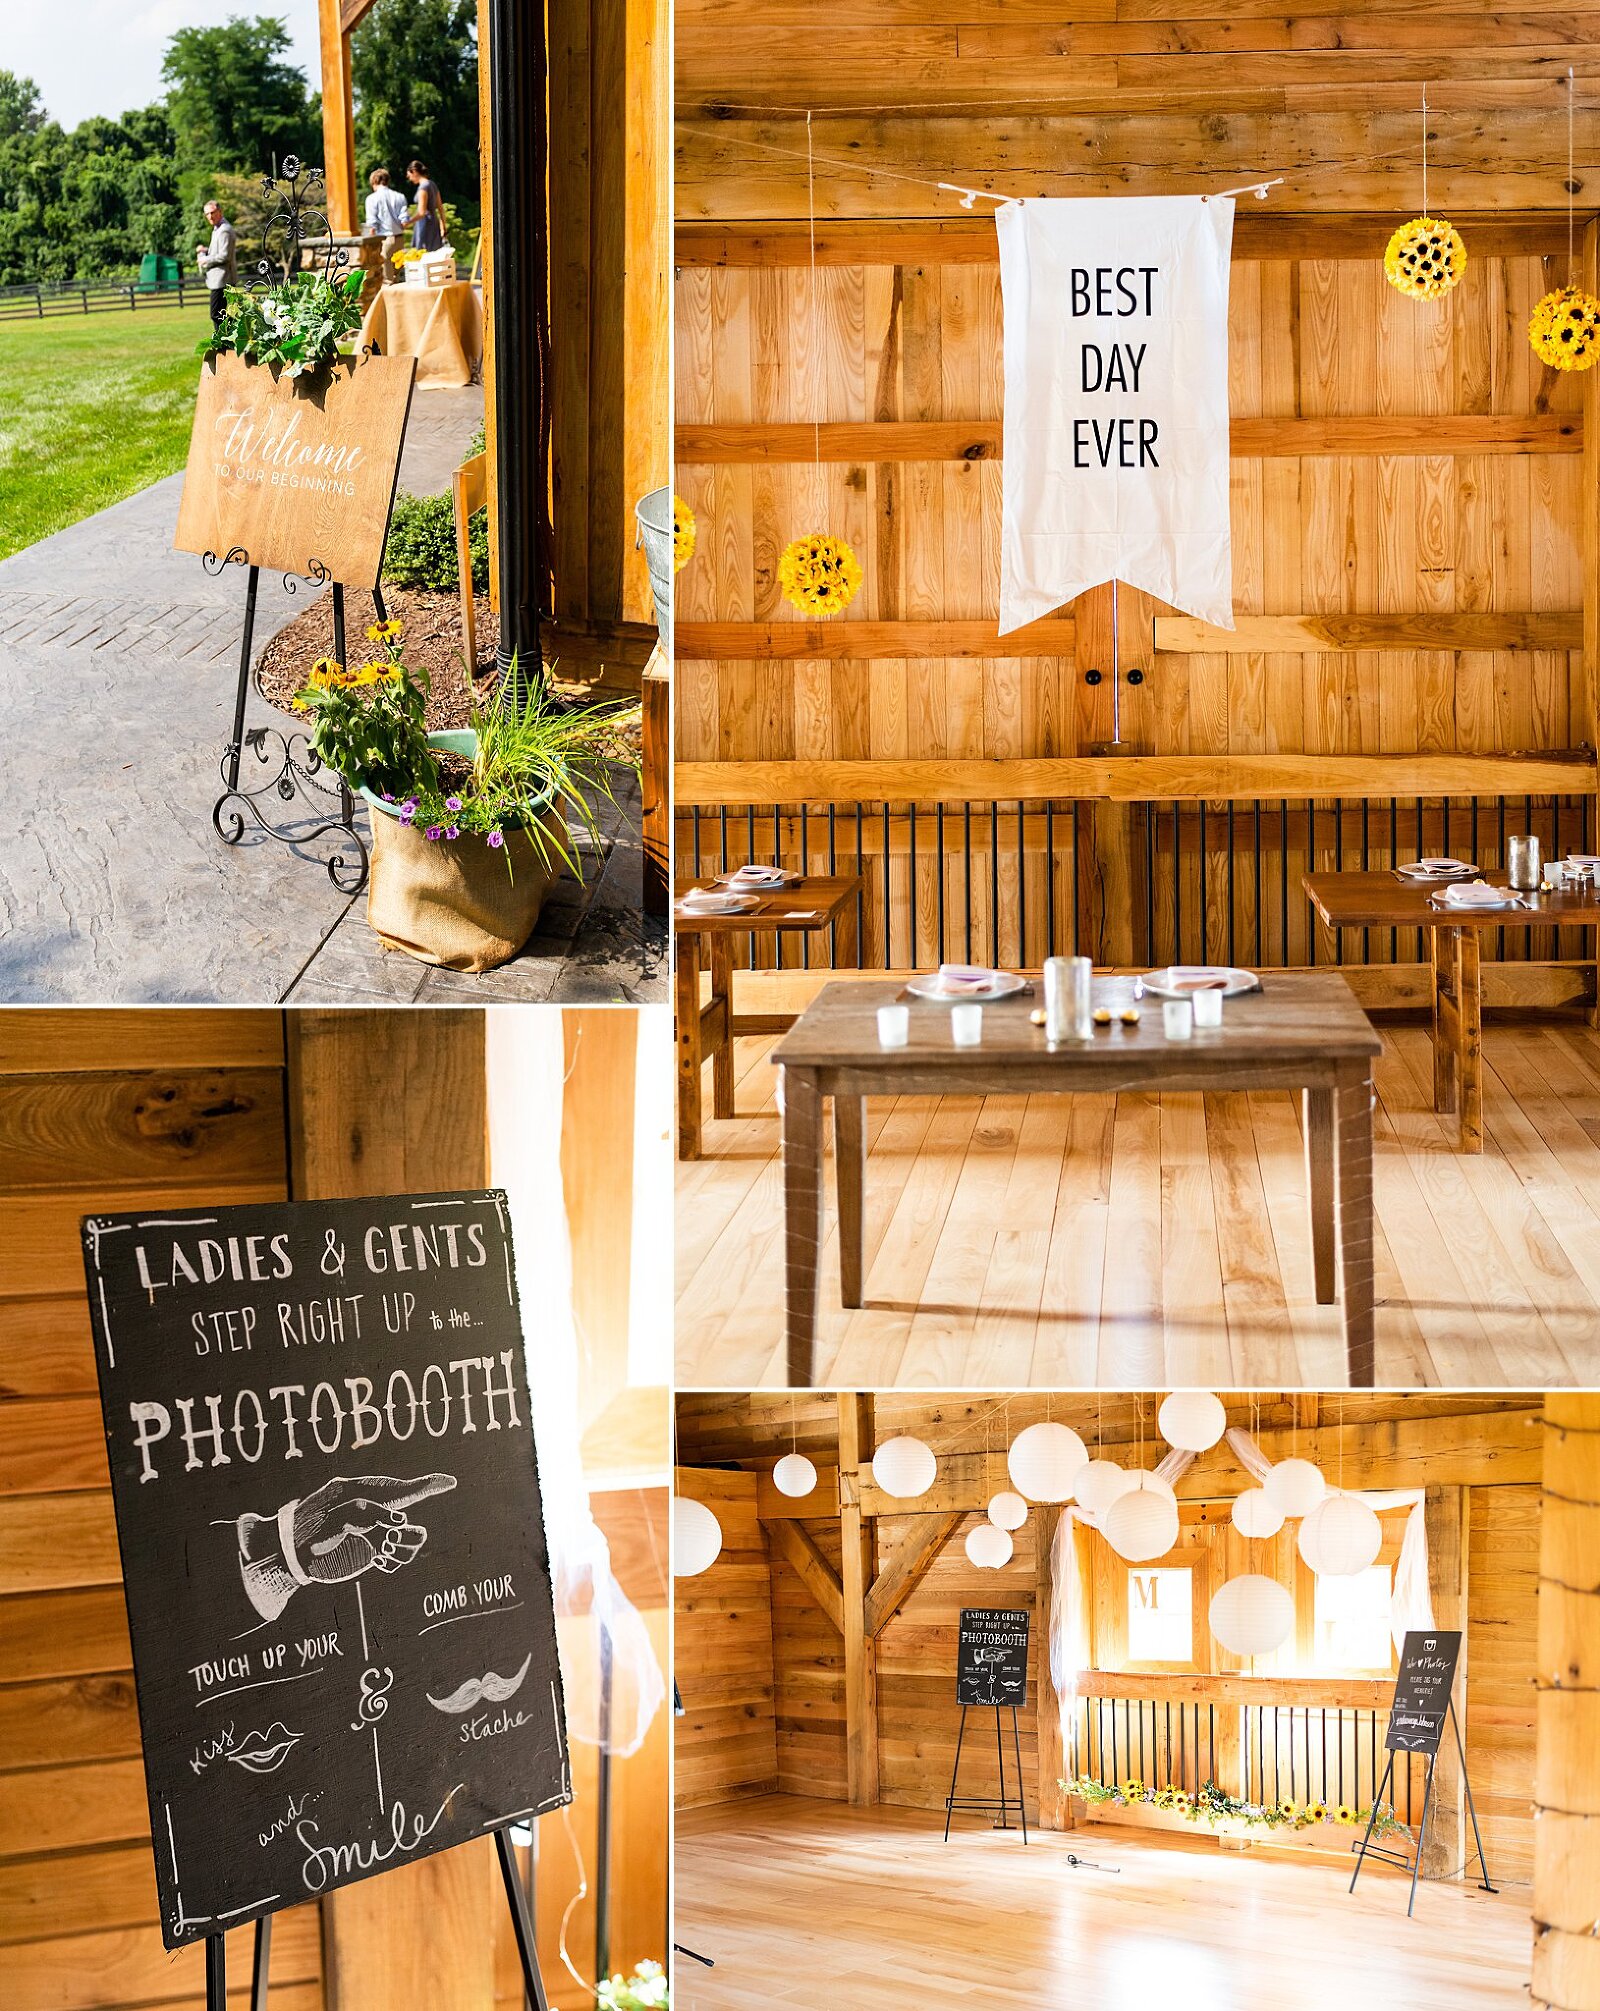 Check out this BEAUTIFUL VIRGINIA WEDDING!! This summer wedding was at The Oak Barn at Loyalty in Leesburg, Virginia. The rolling hills, hay bales, and beautiful barn venue was gorgeous! Photographed by Bethanie Vetter Photography LLC. #oakbarnatloyalty #theoakbarnatloyalty #theoakbarn #virginiawedding #summerwedding #julywedding #weddingphotos #weddingphotography